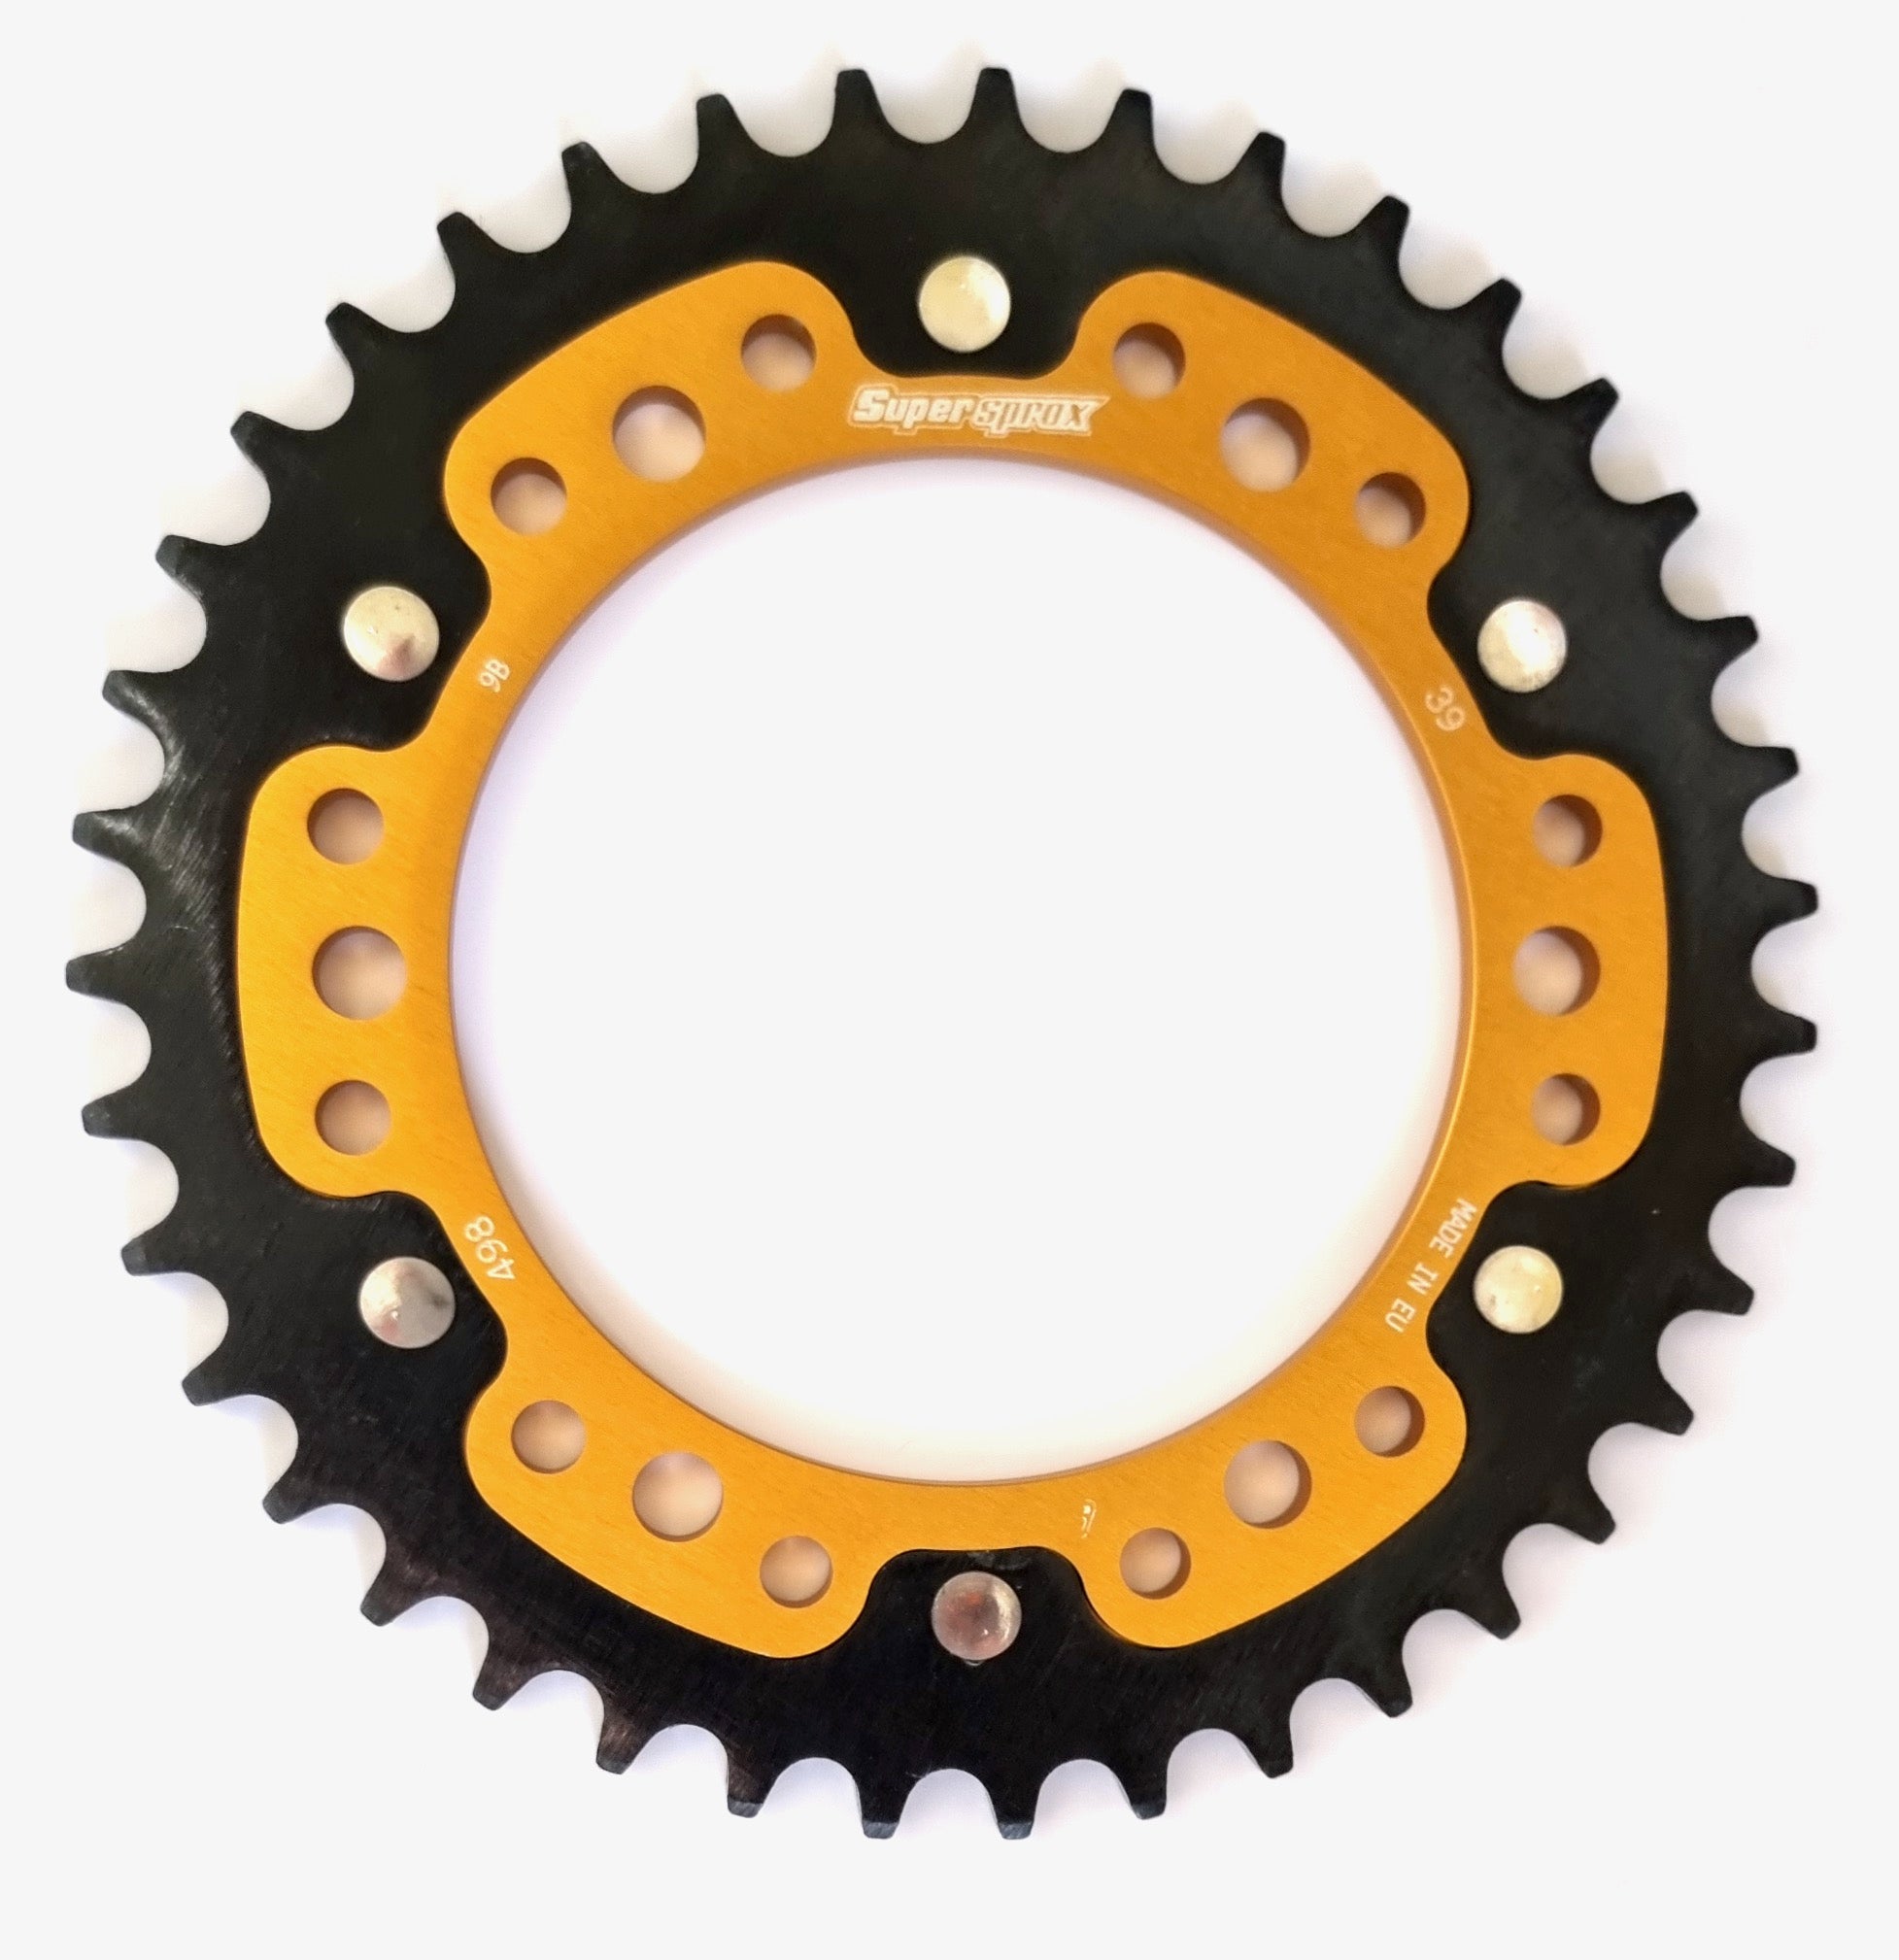 Supersprox Stealth 525 Pitch Rear Sprocket RST-498:39 - (525, 120mm Centre, 140mm PCD) For Dymag Wheels